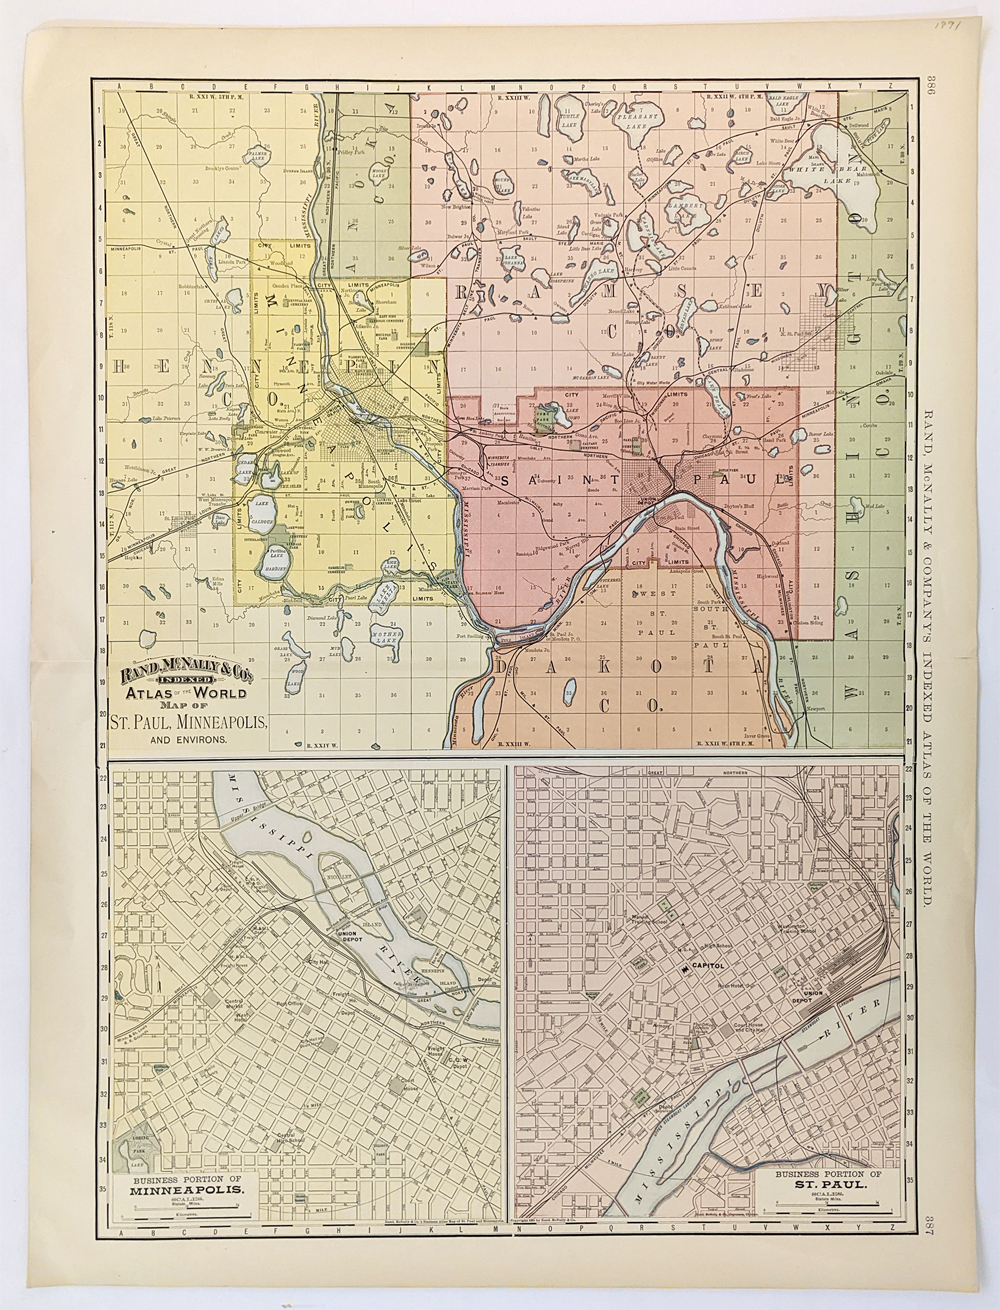 Rice's Map of the City of St. Paul.: Geographicus Rare Antique Maps